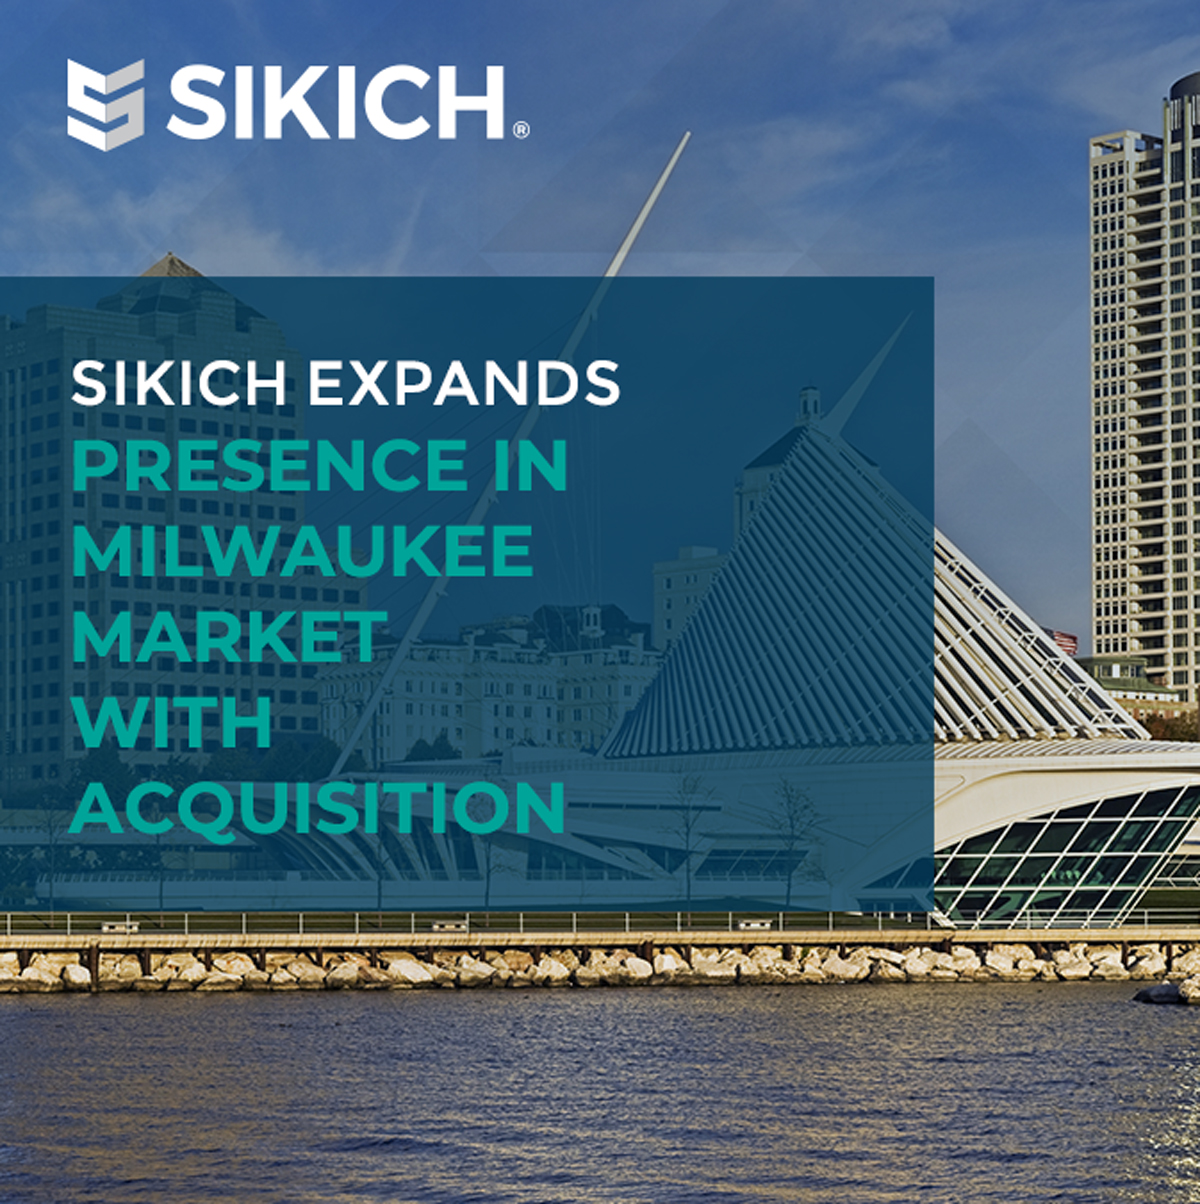 Sikich expands presence in Milwaukee market with acquisition